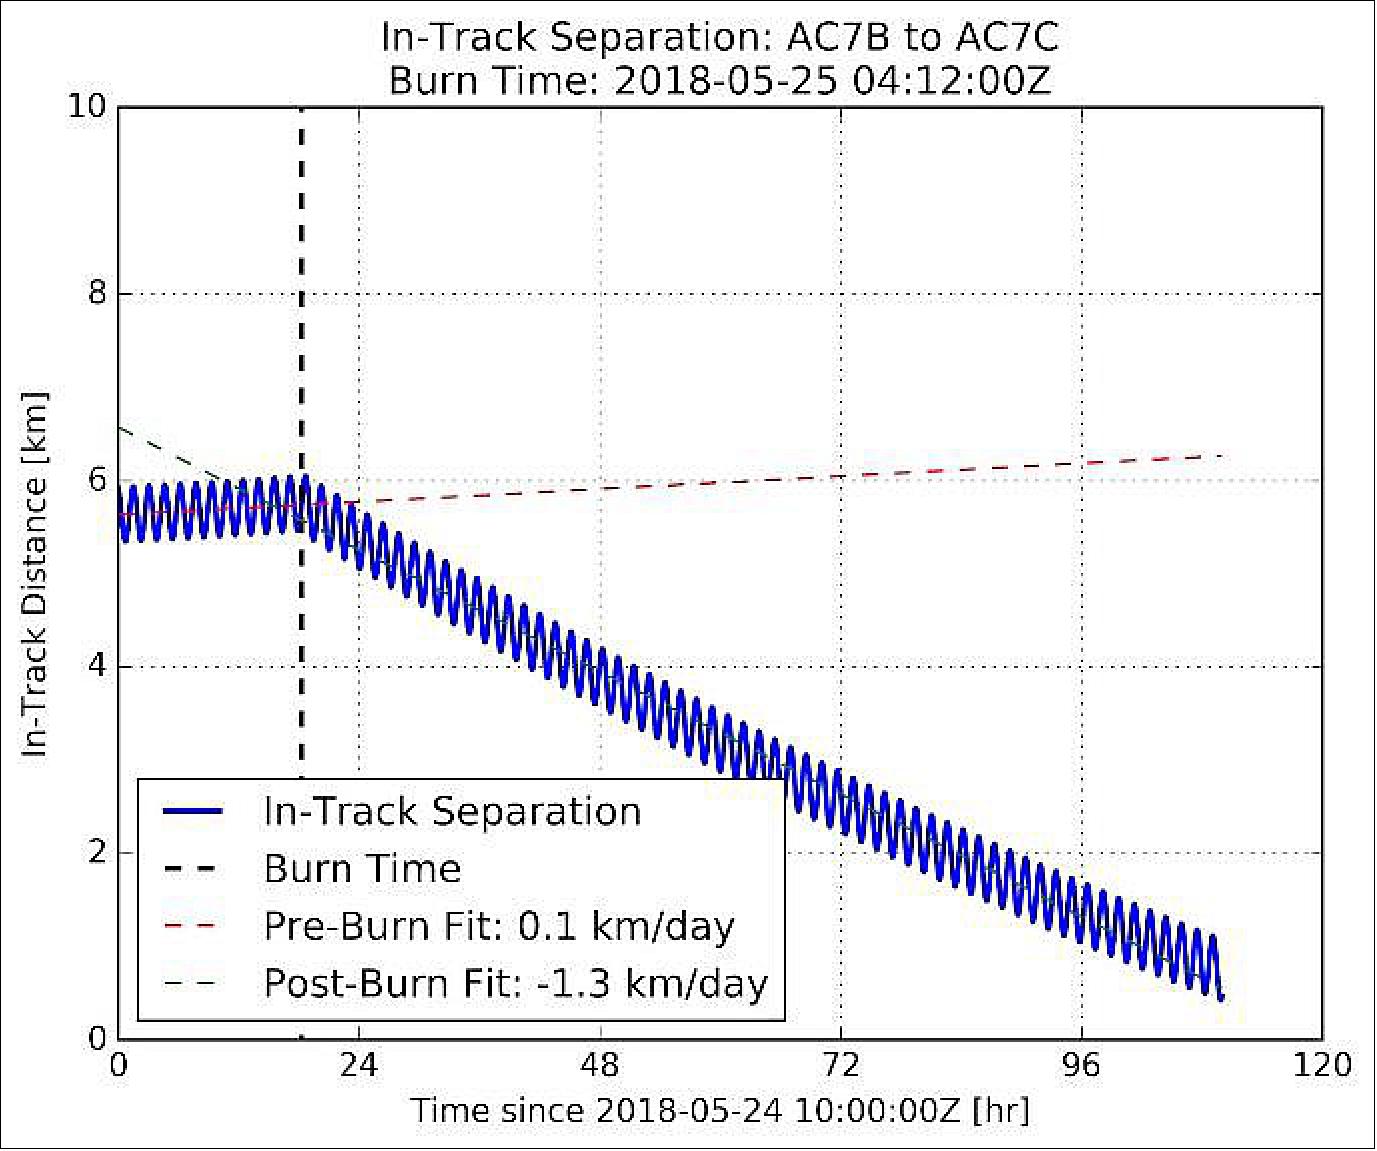 Figure 13: In-track separation between AeroCube-OCSD-B and -C based on orbital elements before and after the first proximity operations interception burn (image credit: The Aerospace Corporation)